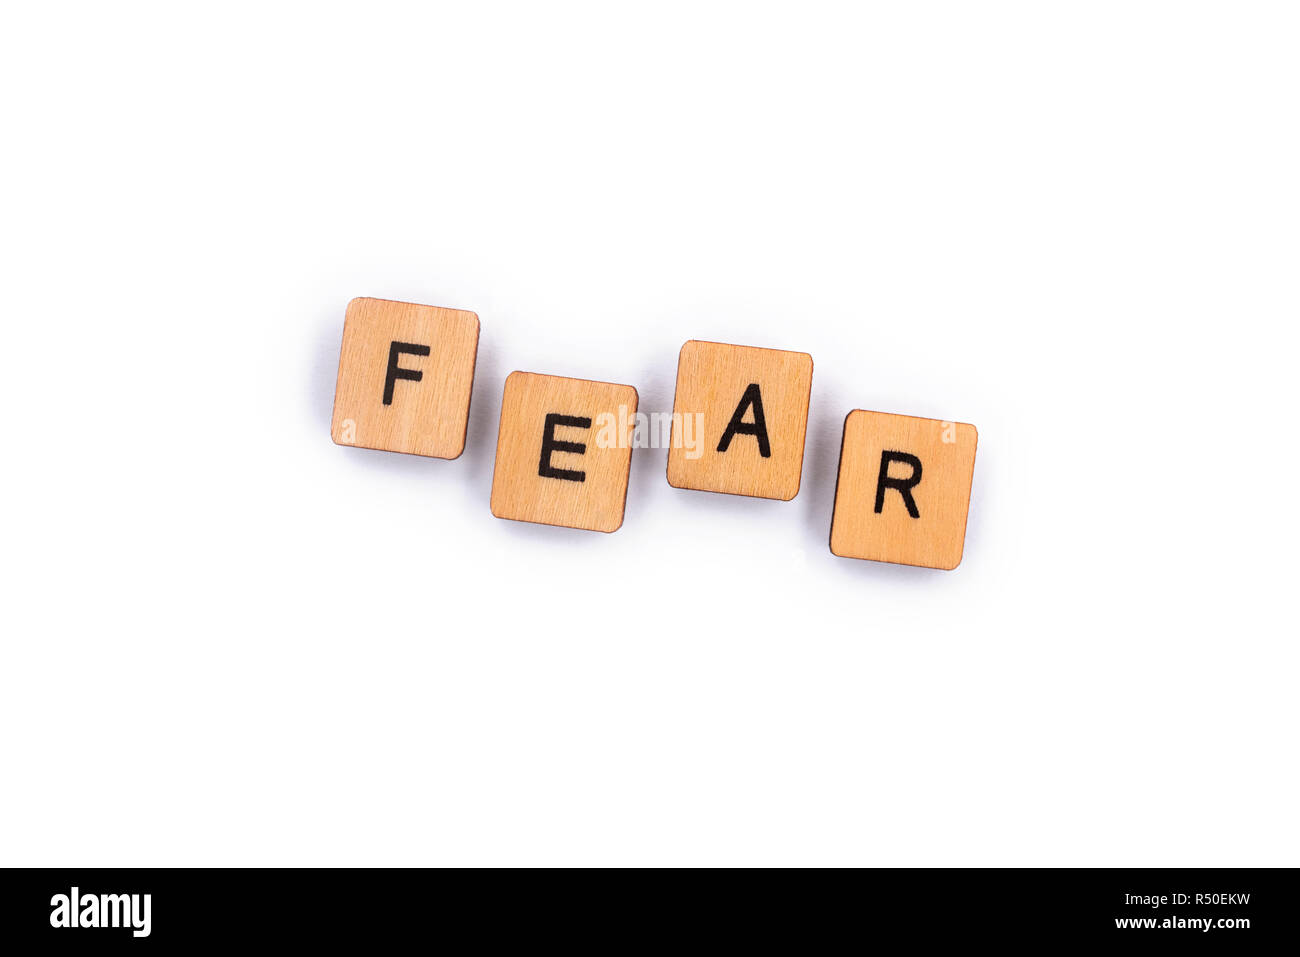 FEAR, spelt with wooden letter tiles over a plain white background. Stock Photo